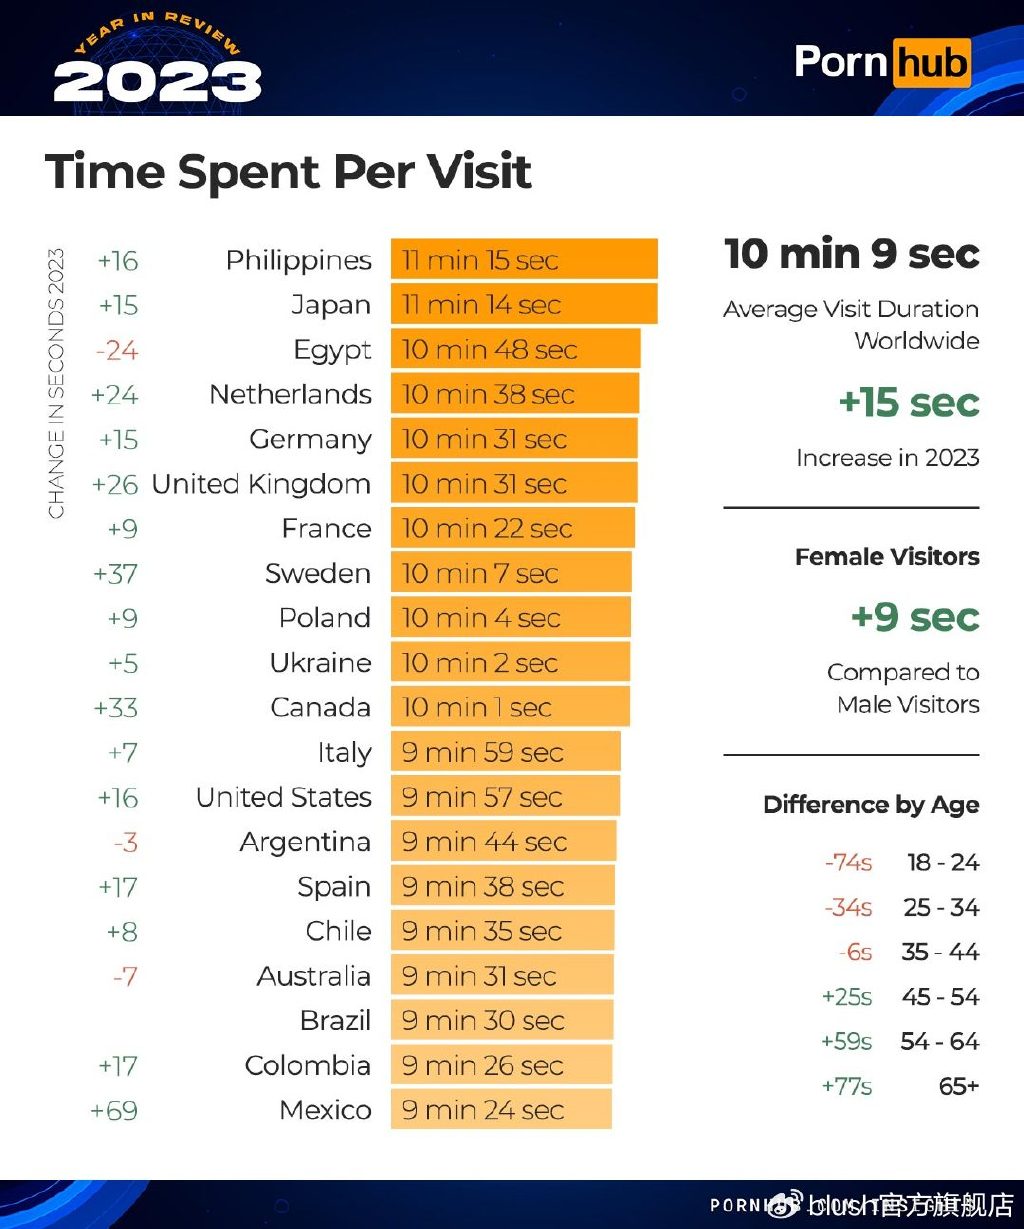 pornhub-insights-2023-year-in-review-time-spent-per-visit.jpg